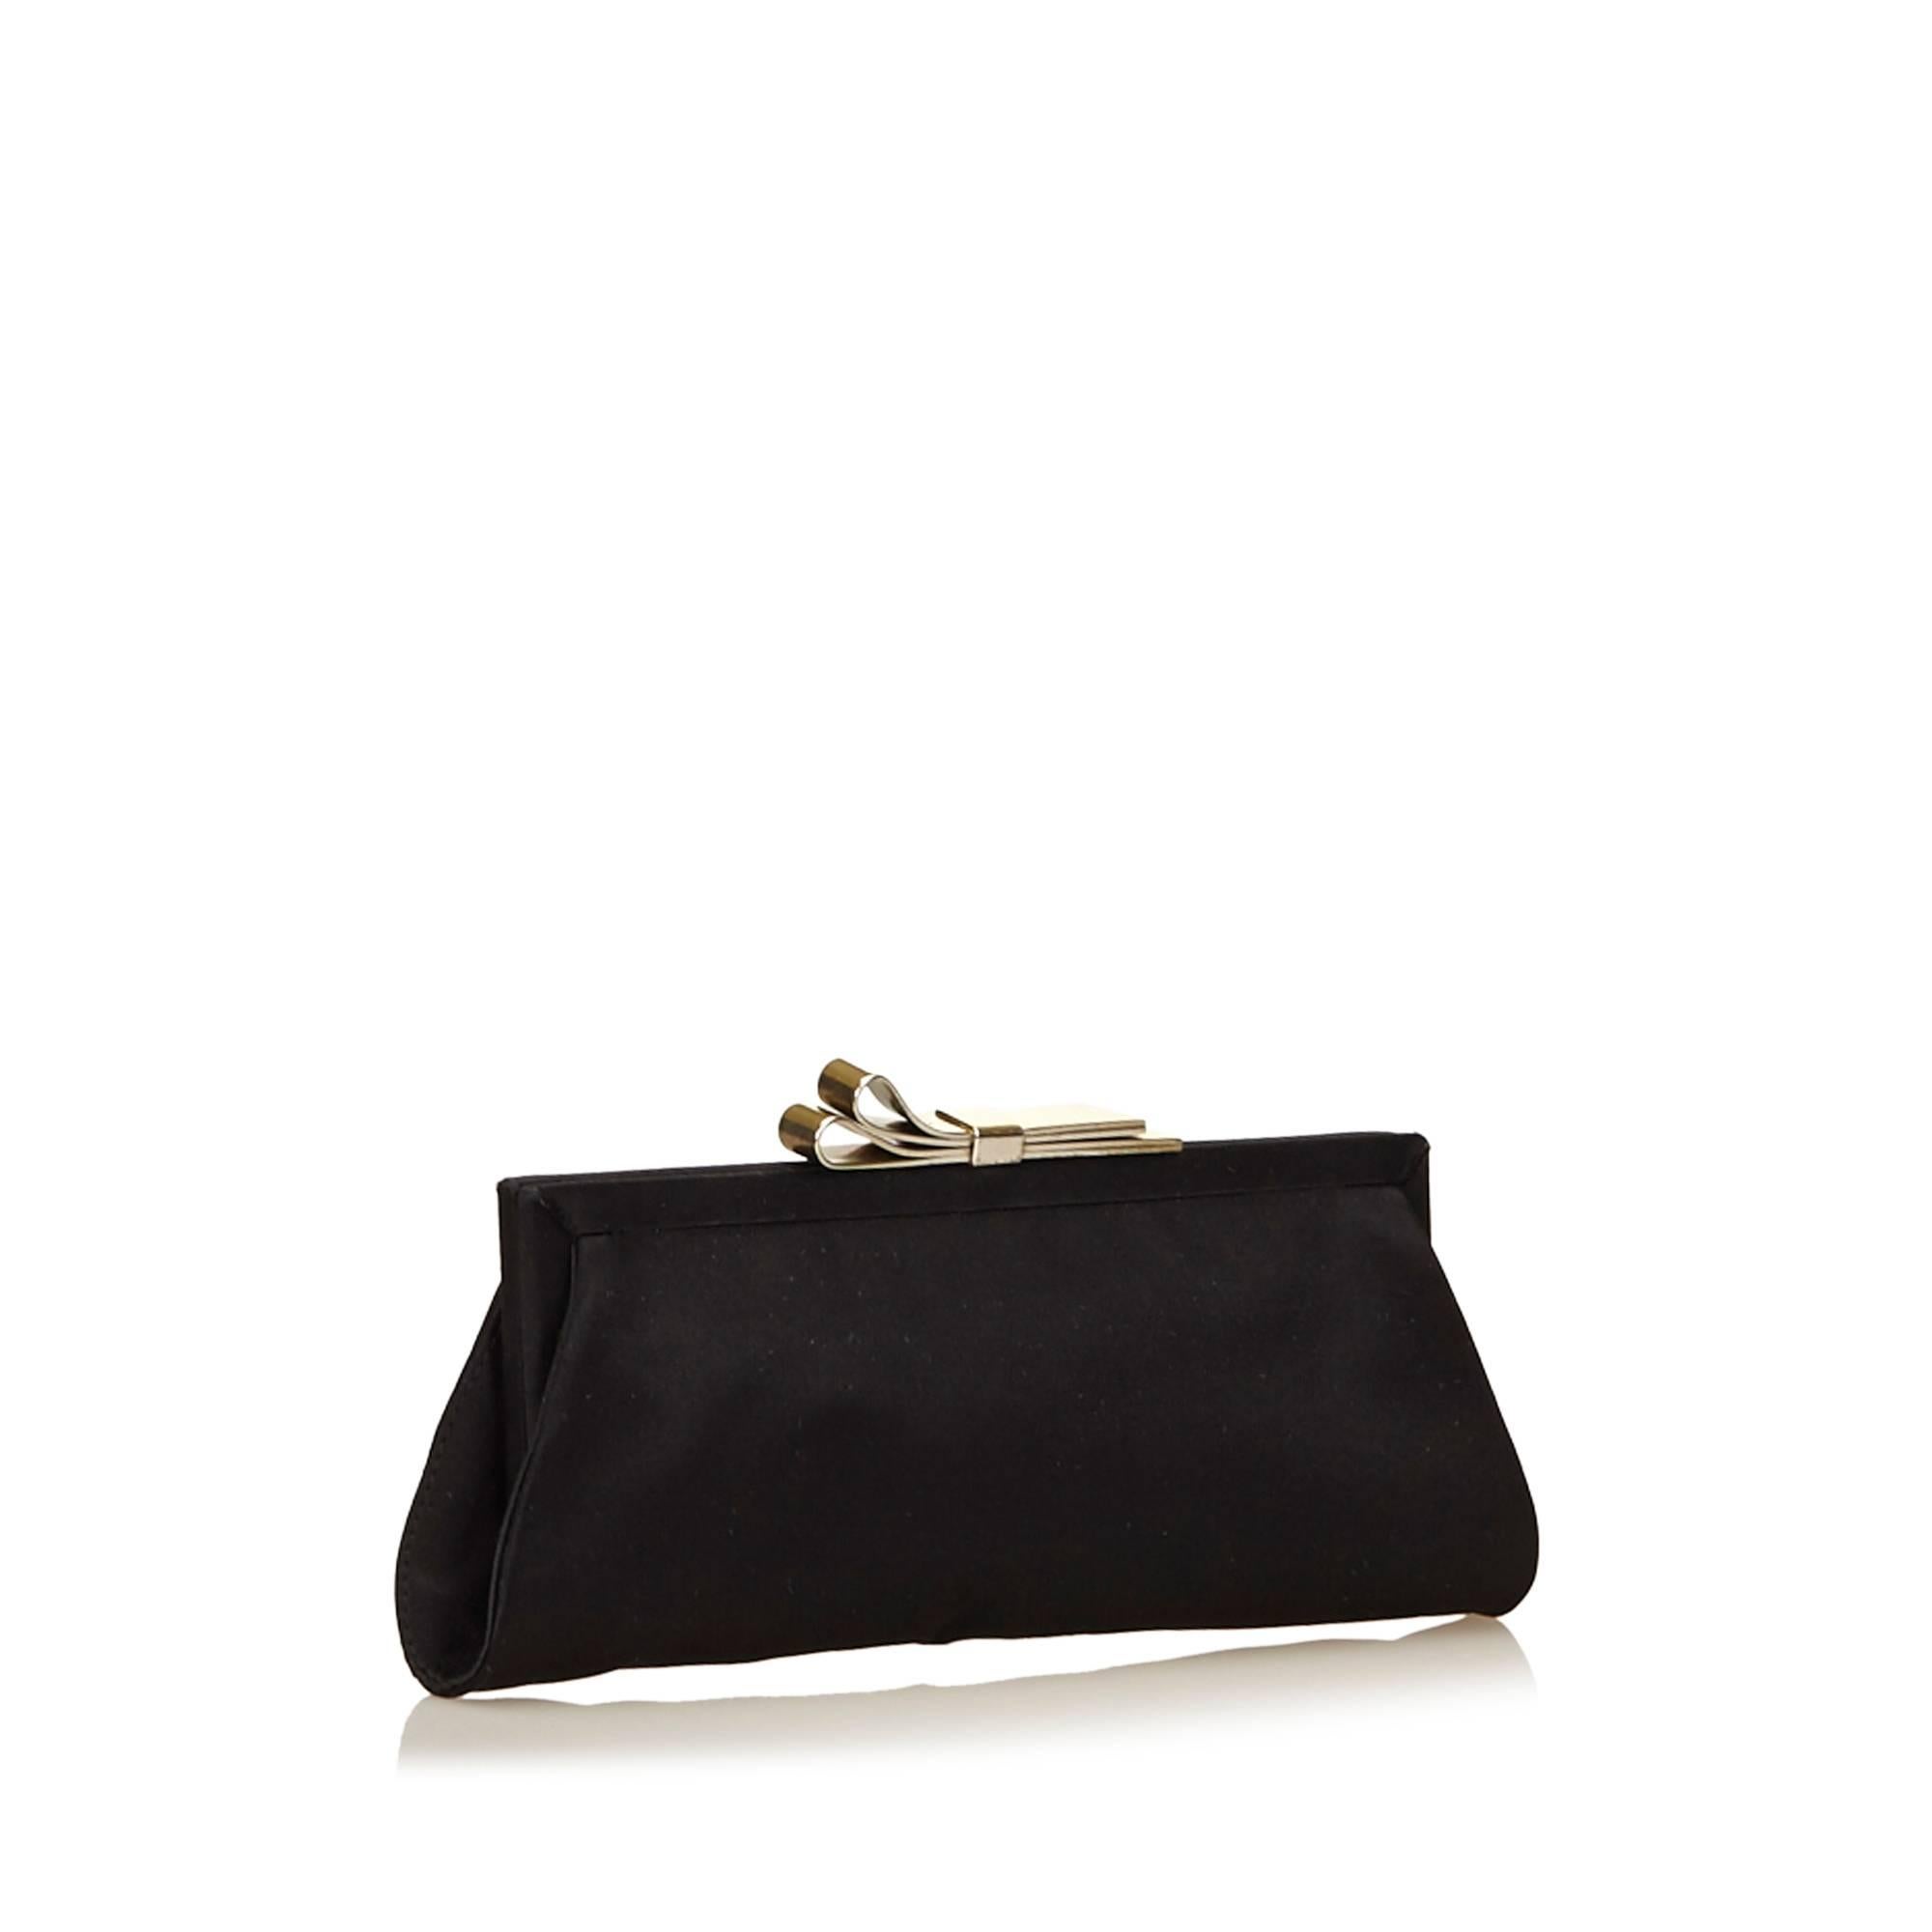 This clutch features a nylon body, a metal frame, and a kiss lock closure.